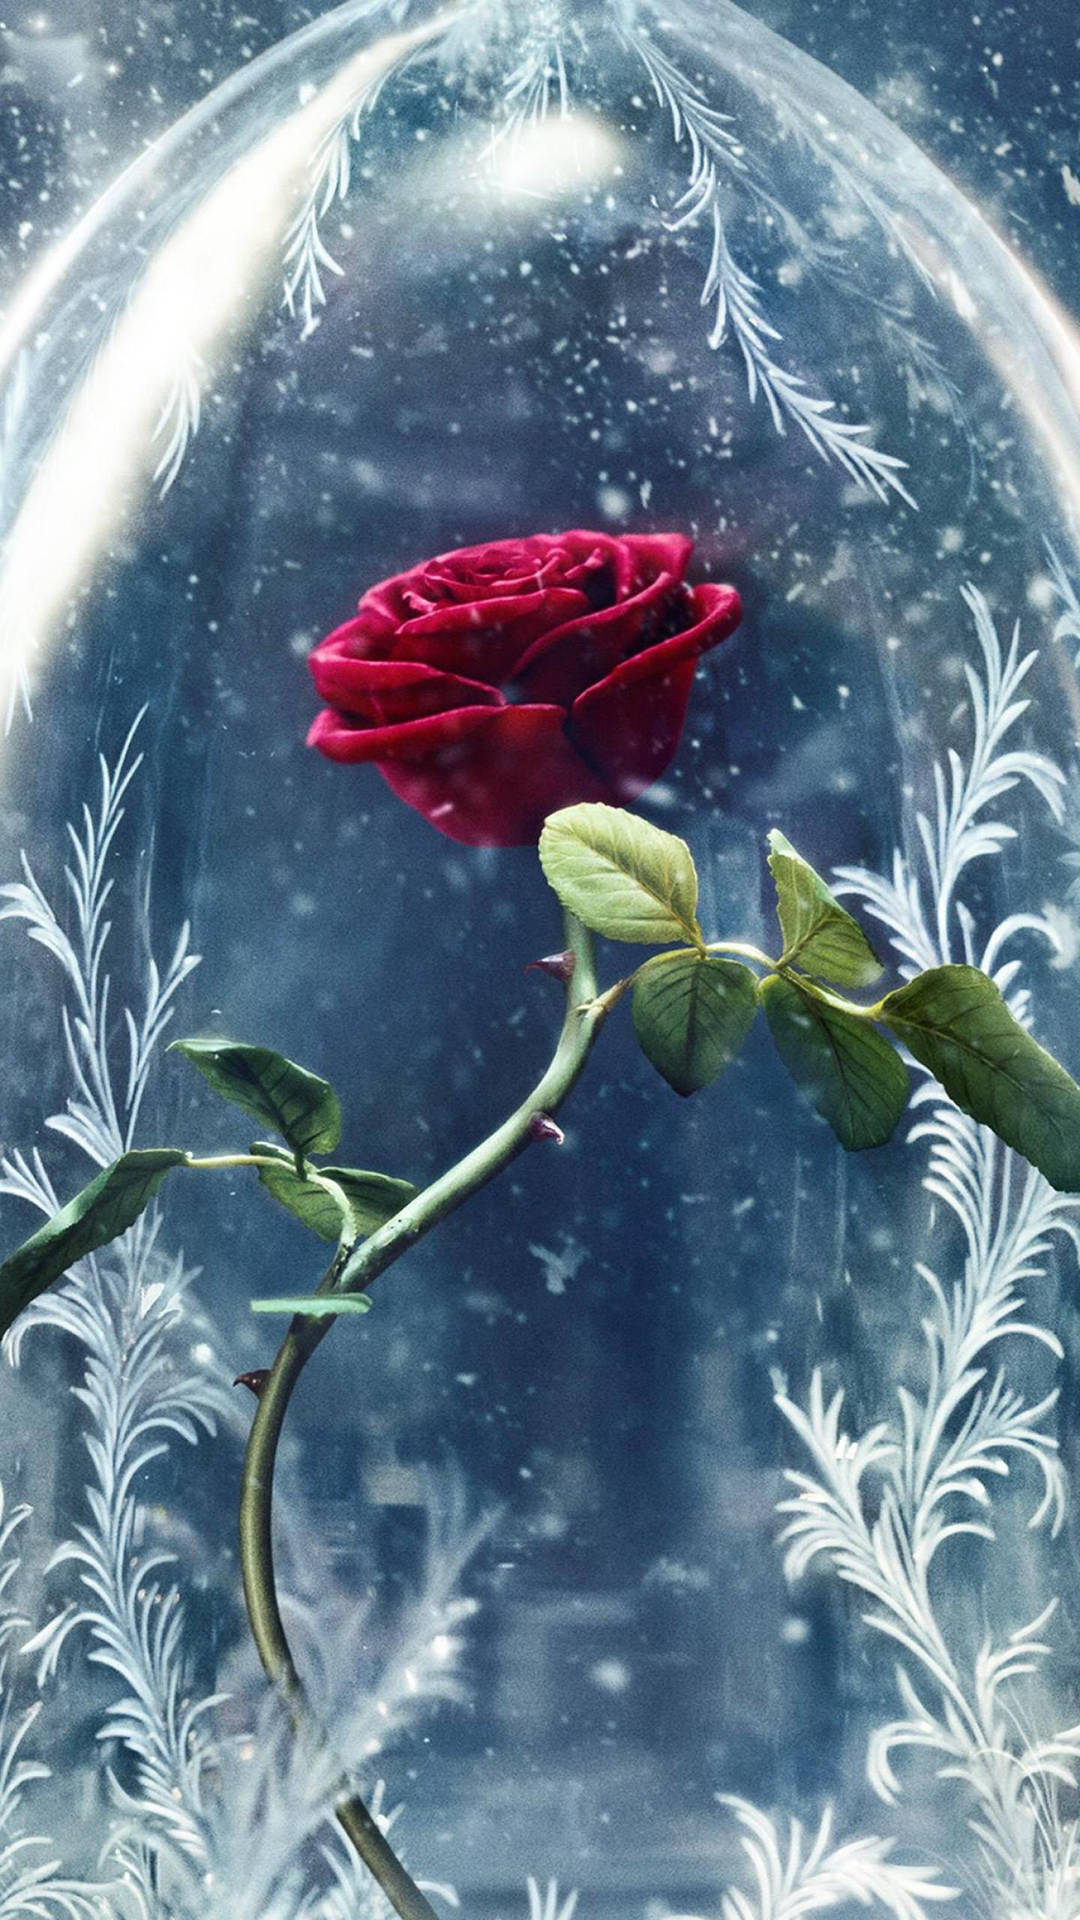 Beauty And The Beast Rose Under Snow Background